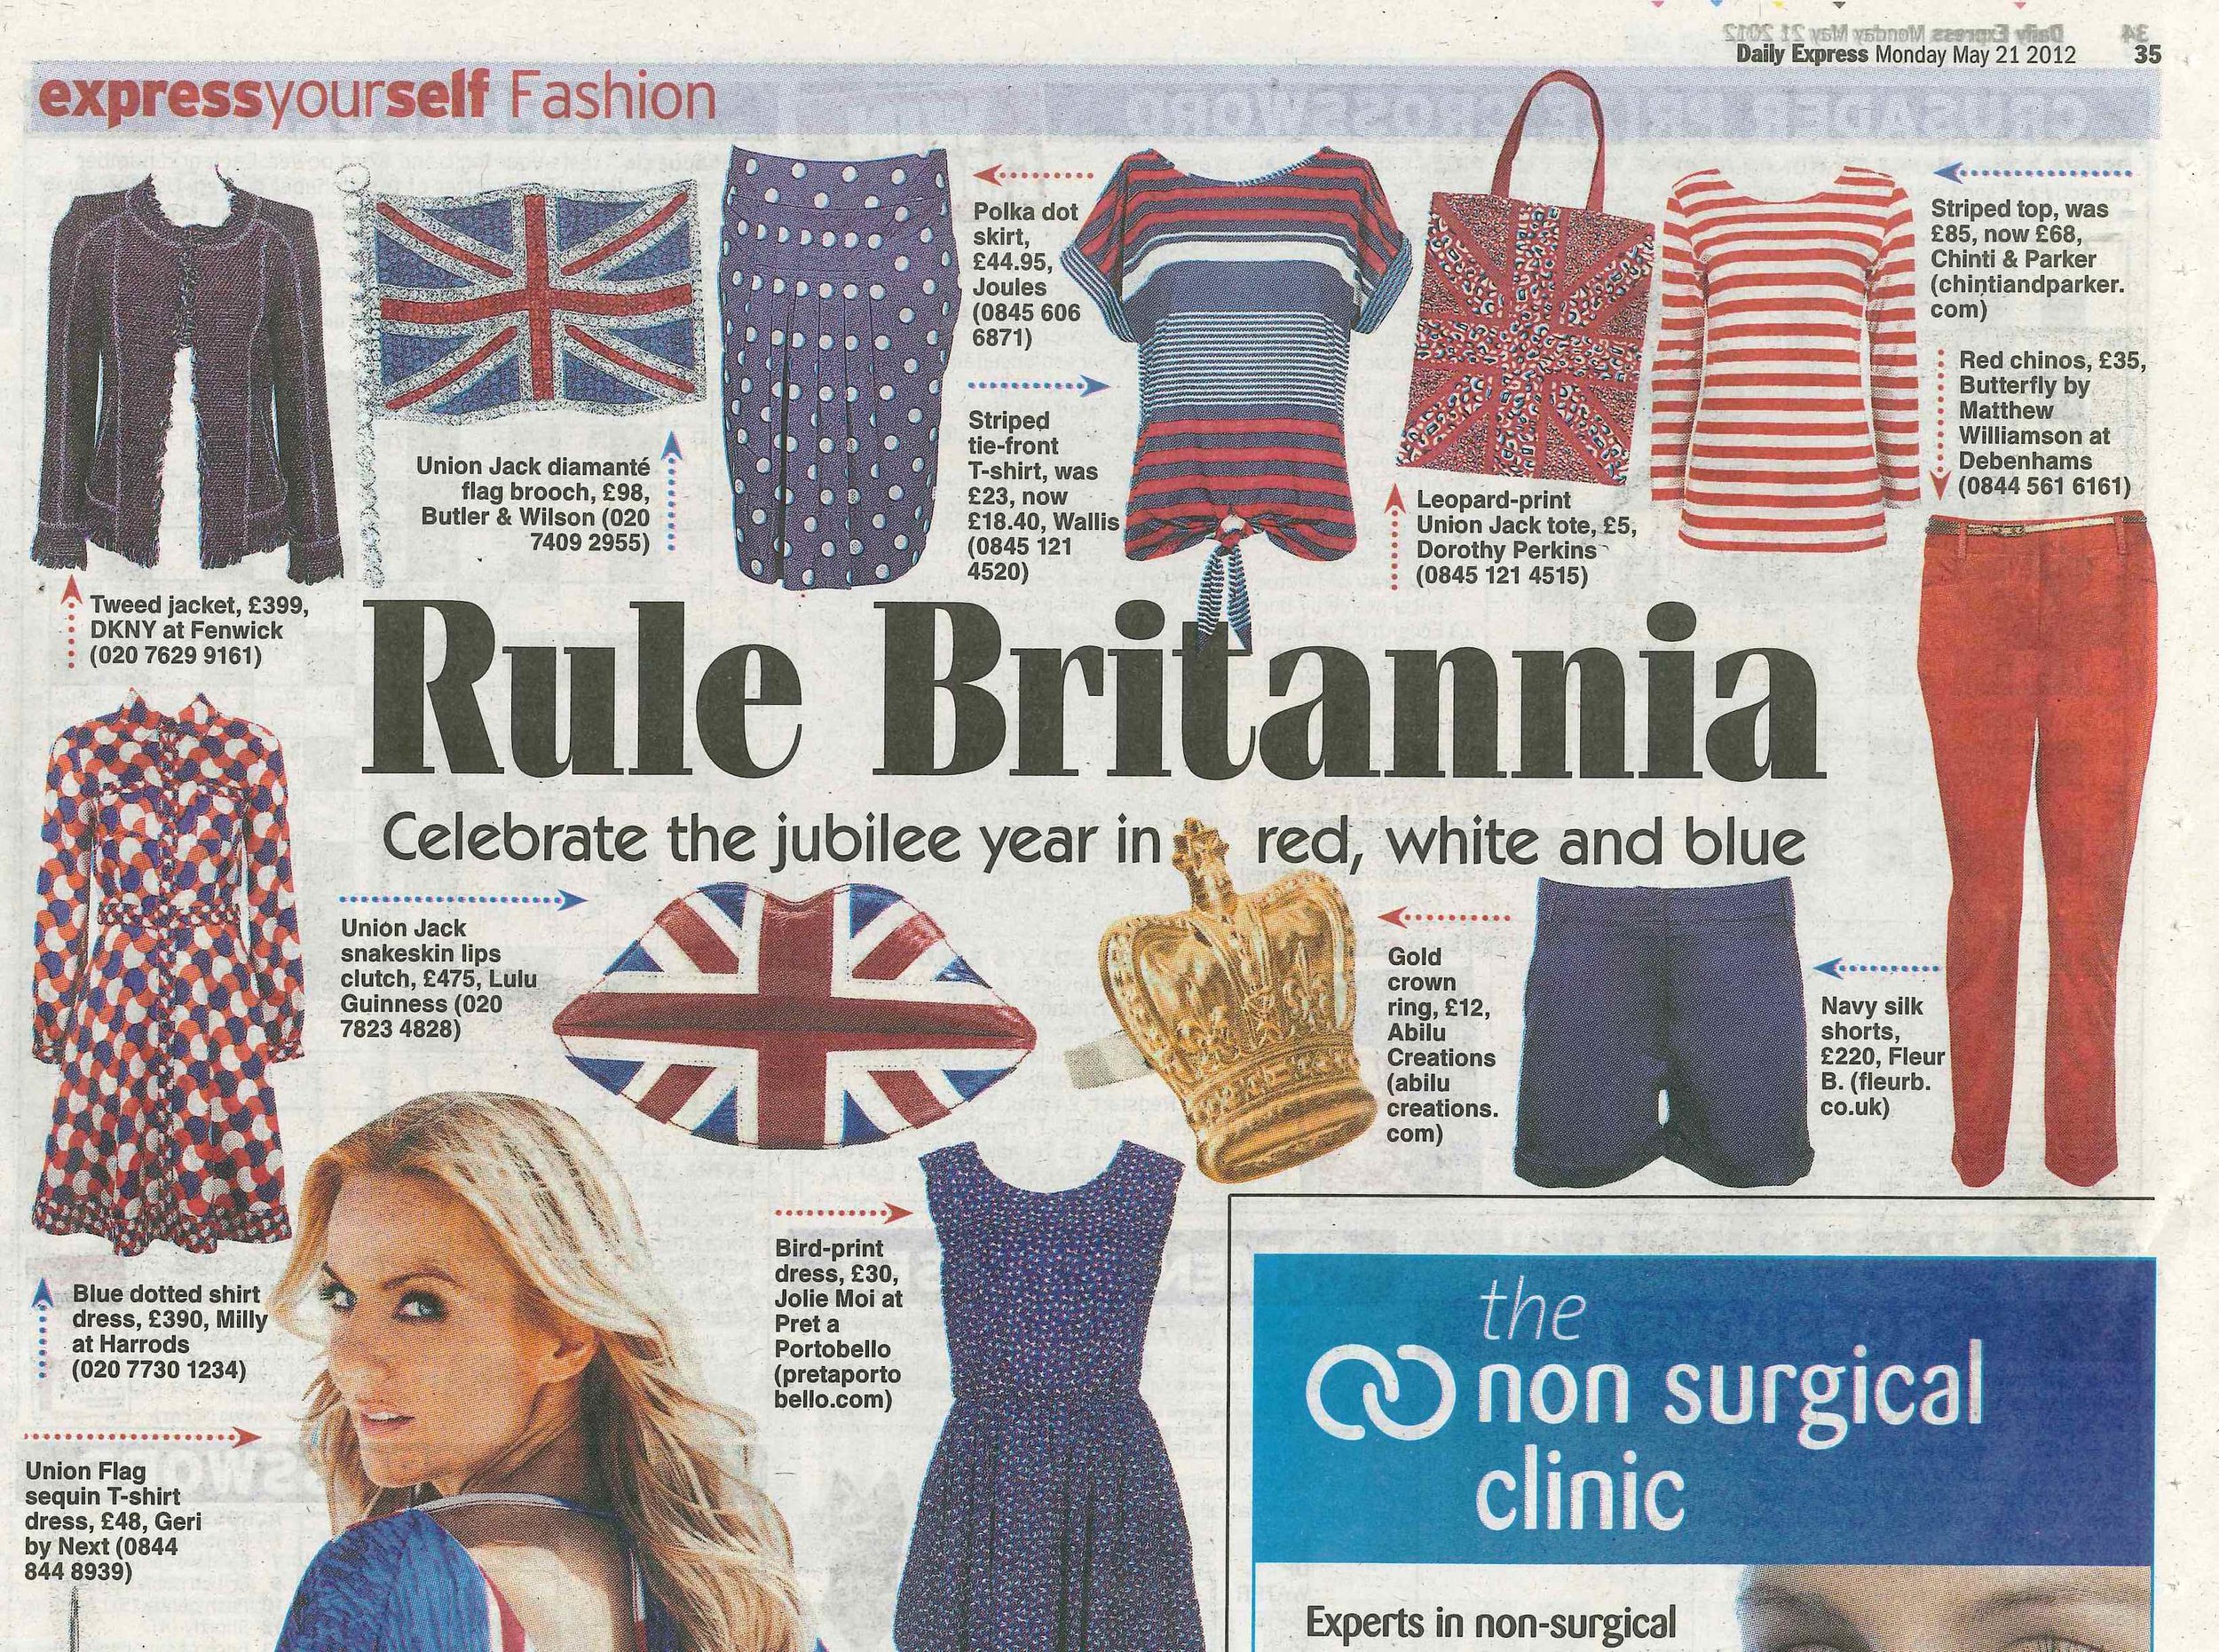 Daily Express Coverage 21.05.12 (2).jpg